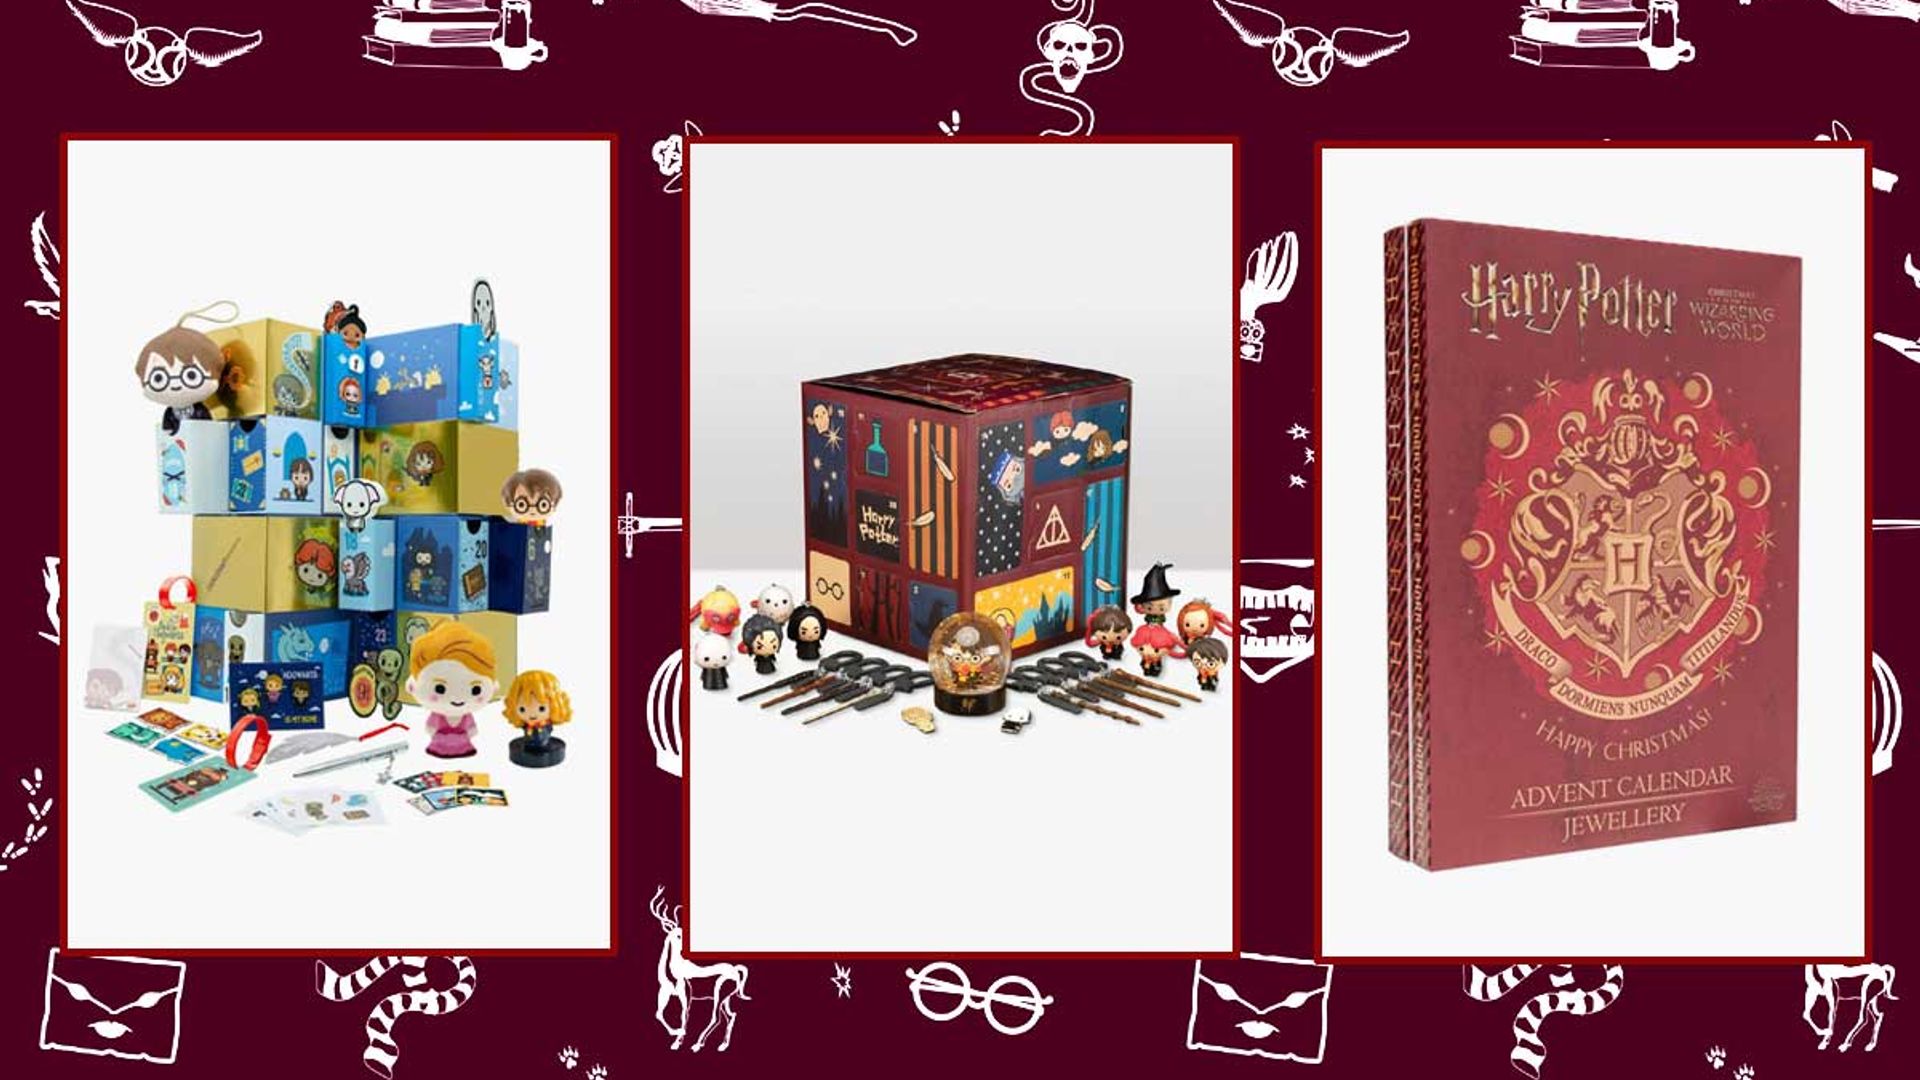 15-best-harry-potter-advent-calendars-for-2022-jewellery-lego-figures-and-more-hello